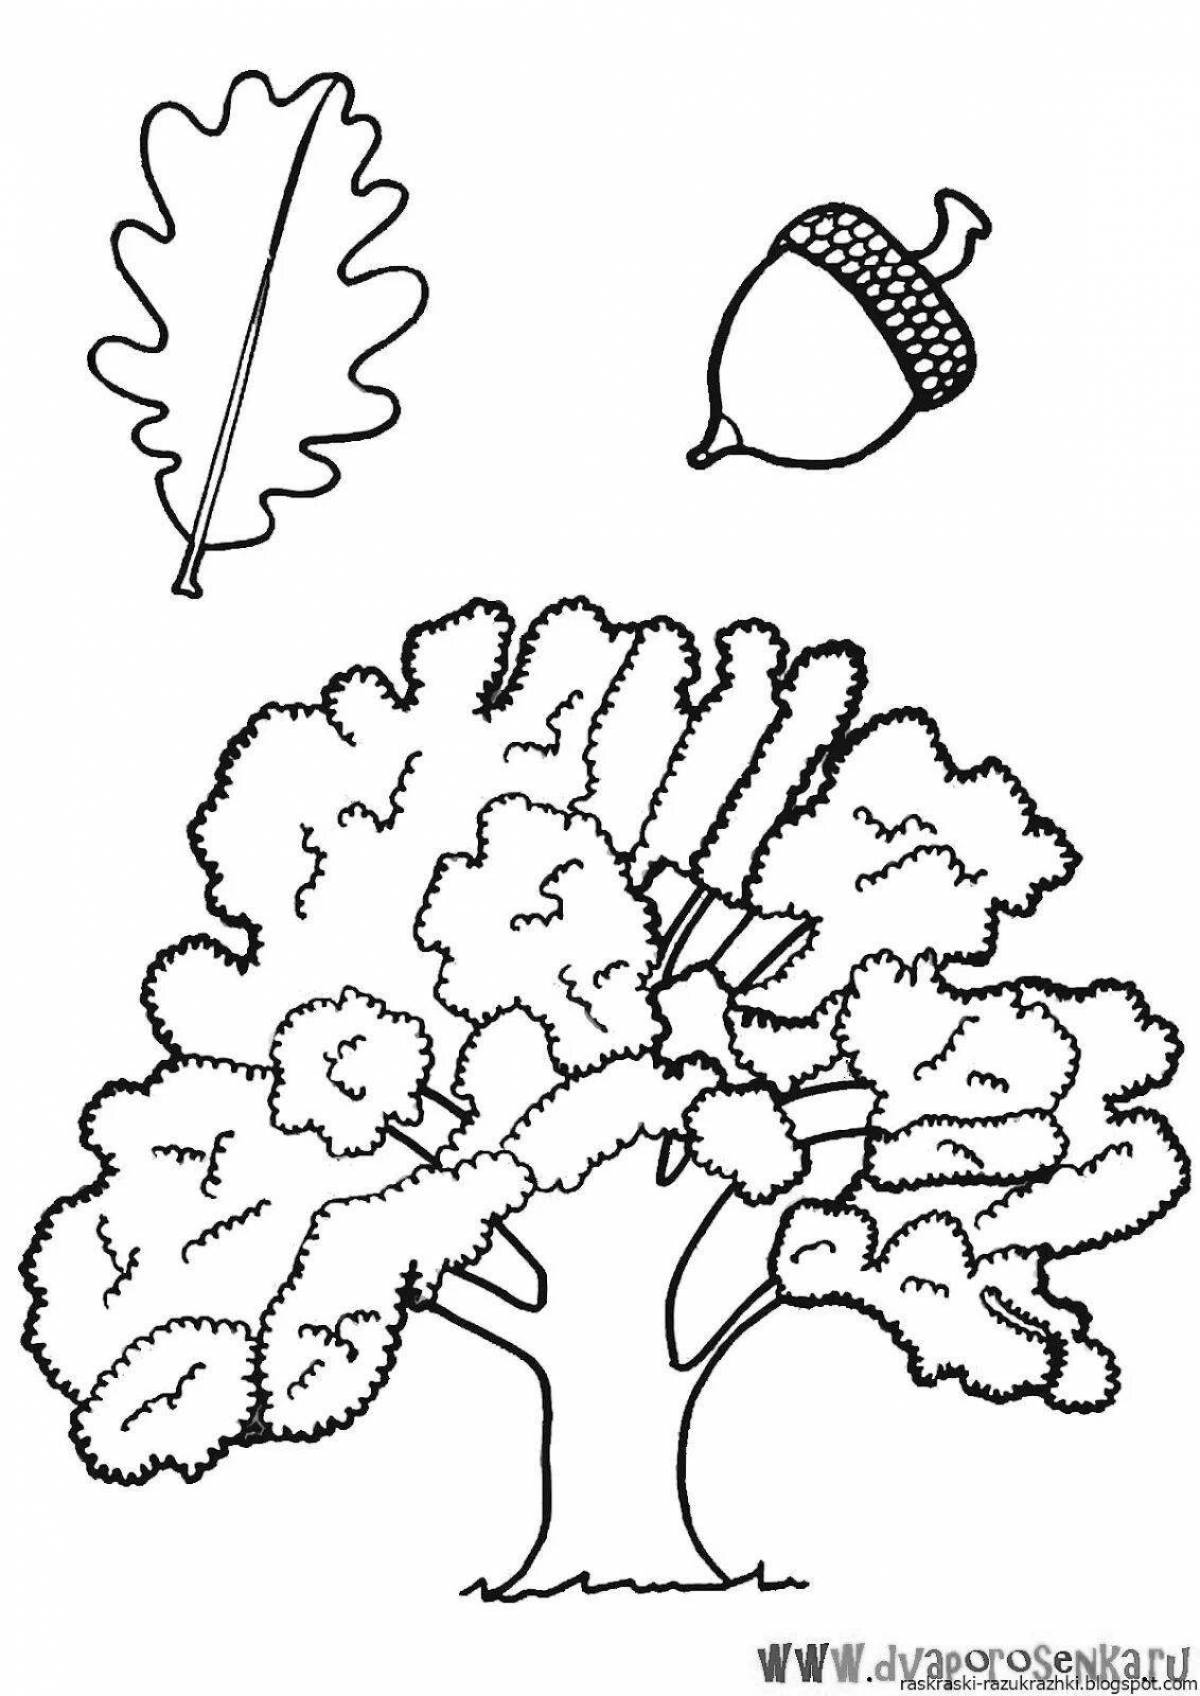 Glitter tree coloring book for 4-5 year olds